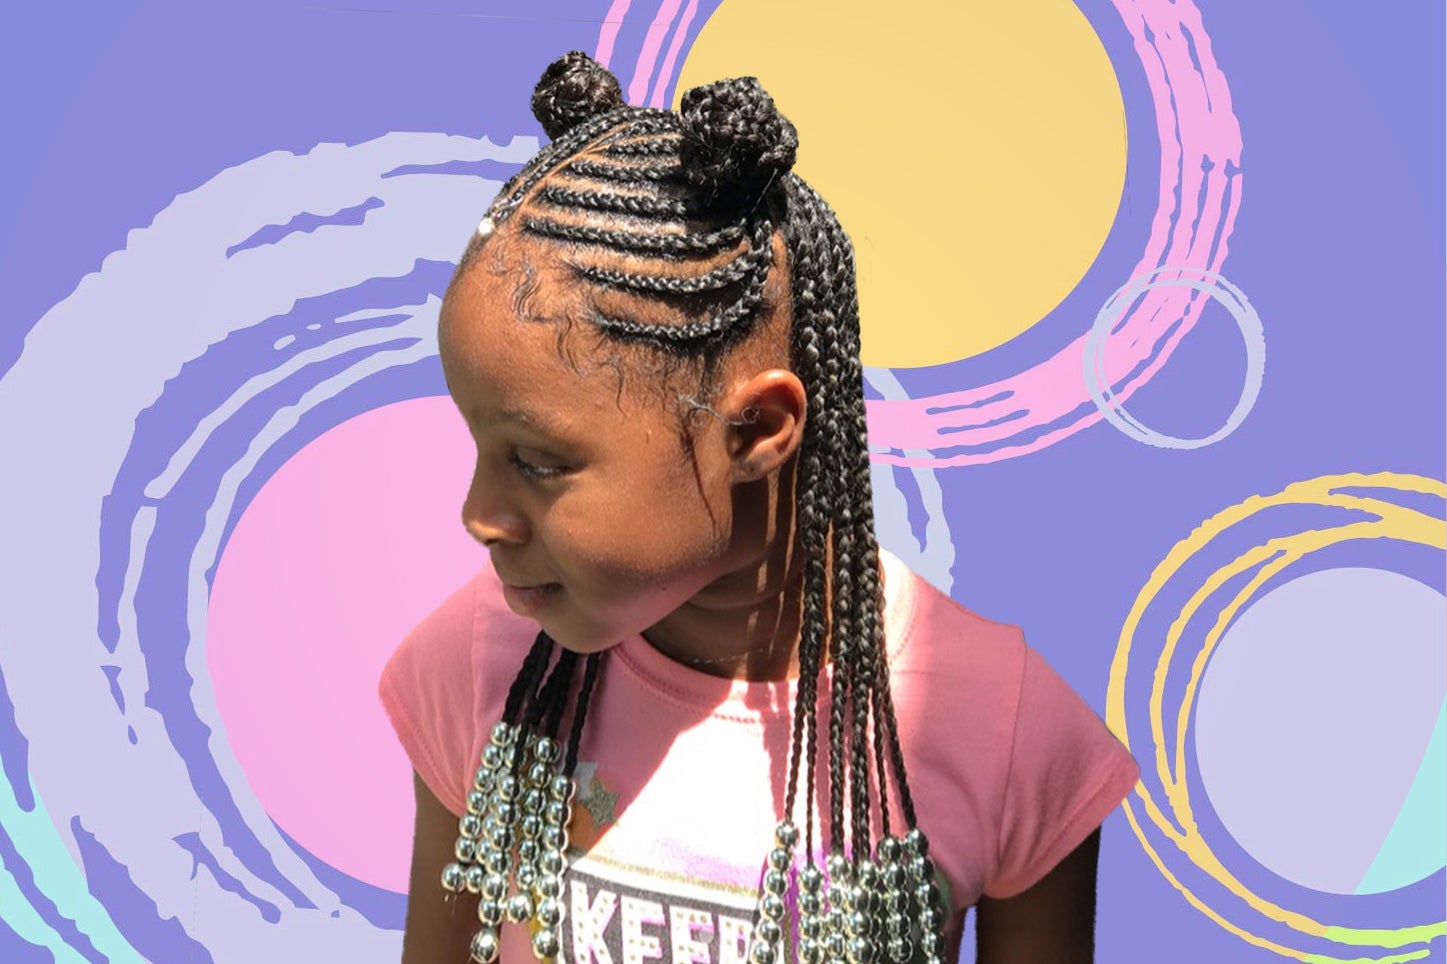 50 Beautiful Kids Braids with Beads Hairstyle Ideas  Braids for kids, Kids  hairstyles, Black kids braids hairstyles